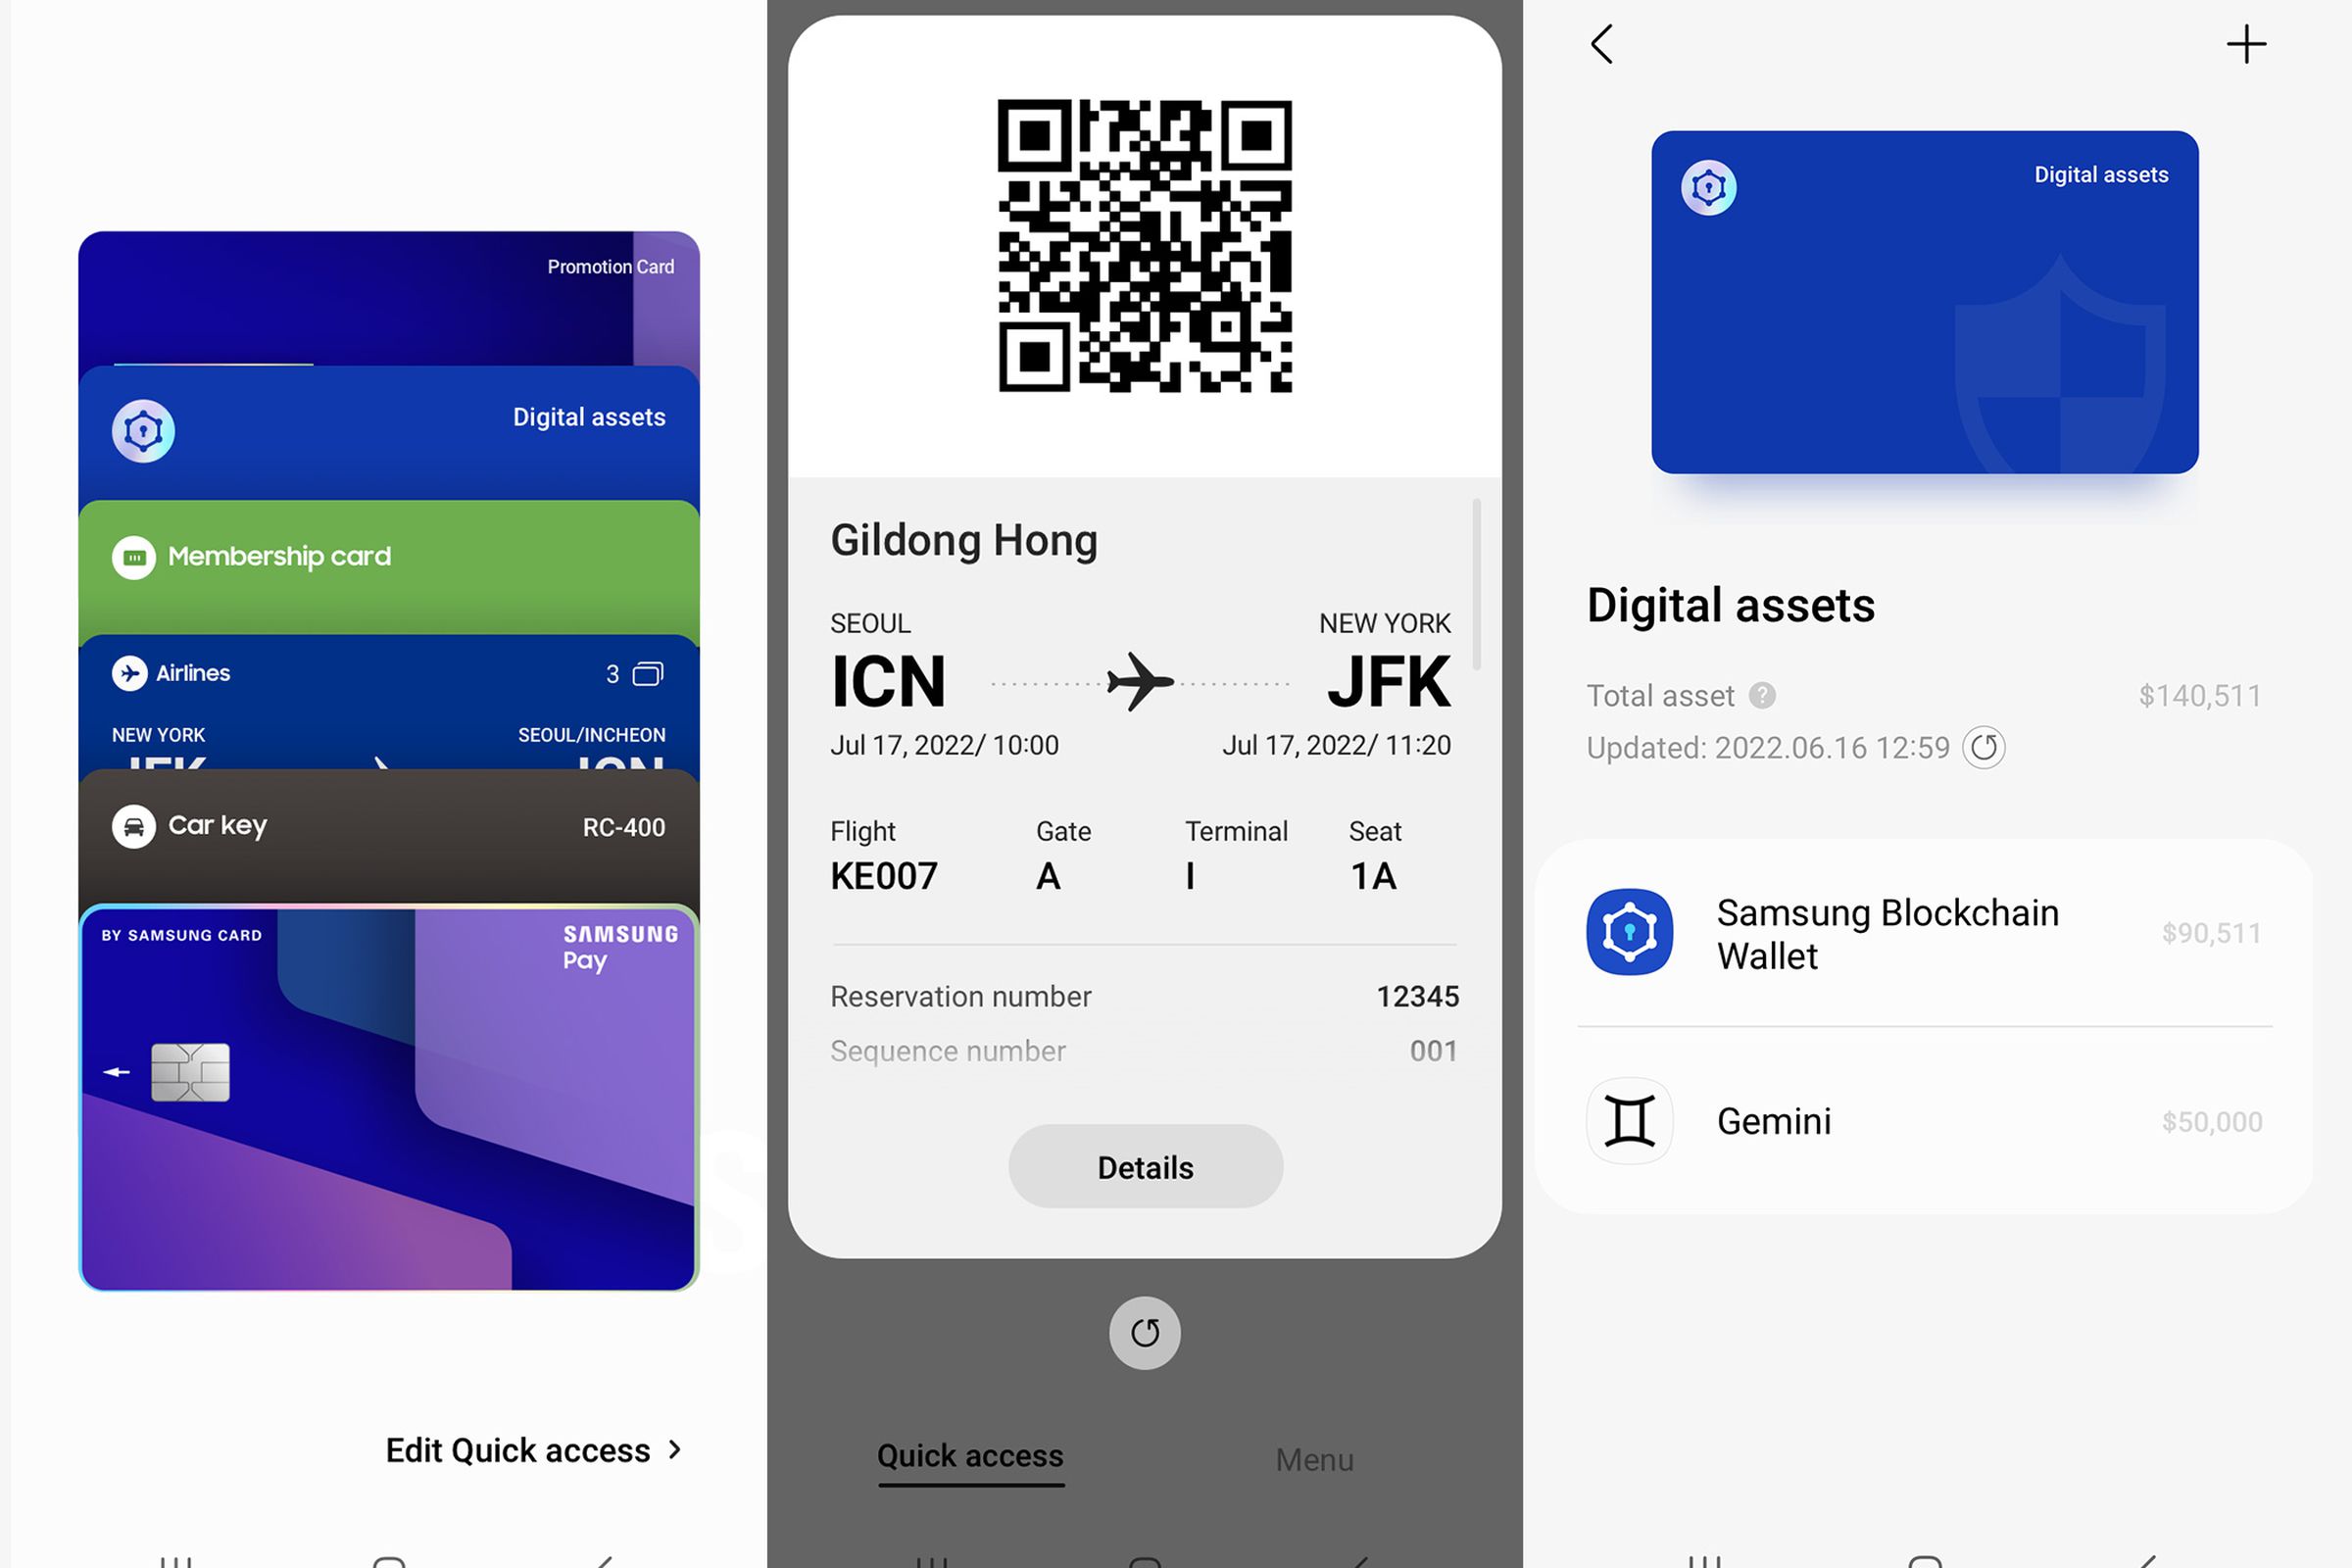 Samsung’s new Wallet will keep payment cards, car keys, and cryptocurrency accounts in one place.